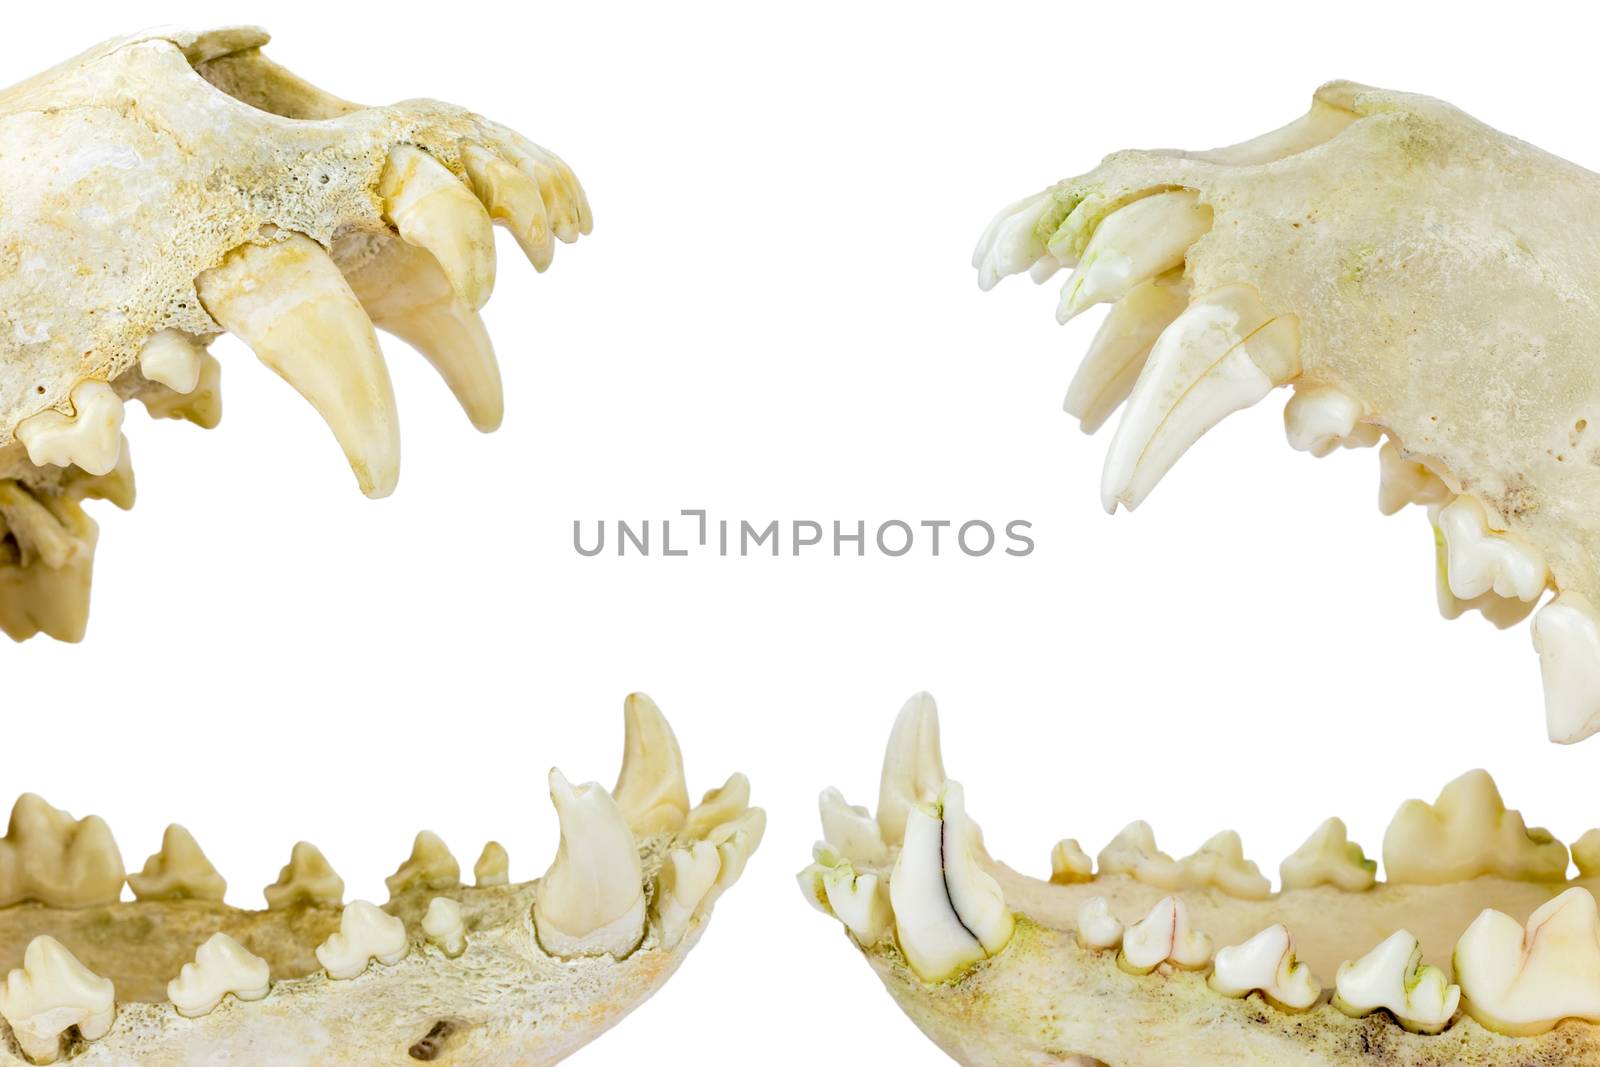 Two dogs skulls with open mouths as symbol for fight and aggression, isolated on white background